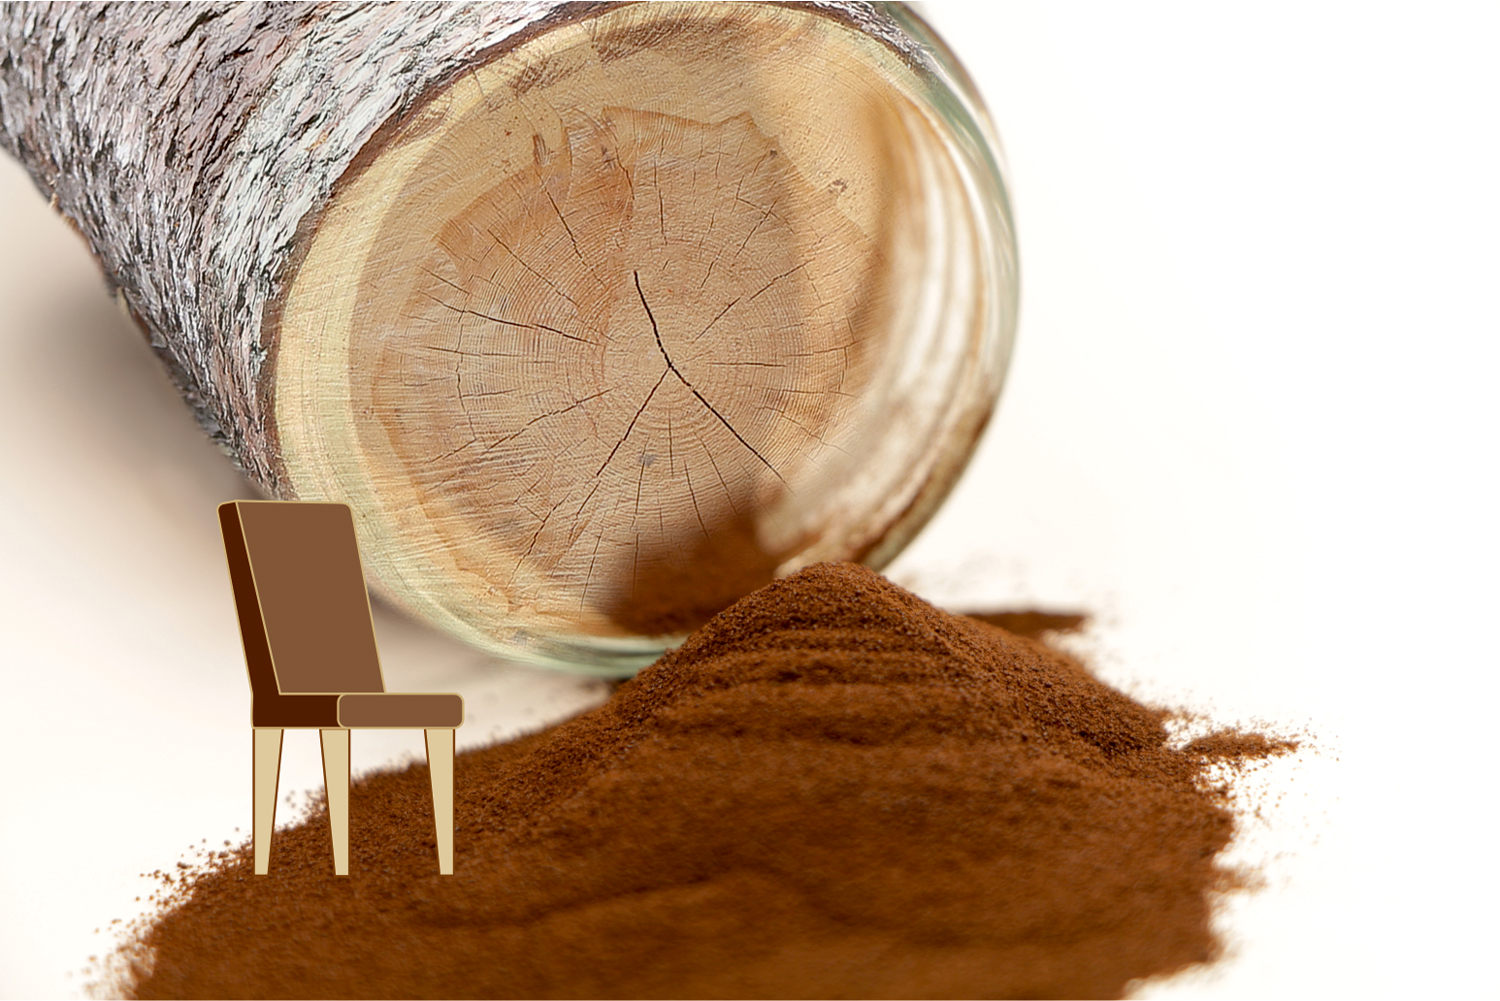 The photomontage shows a tree trunk, a mound of brown lignin powder and the symbolic, graphic representation of a chair.